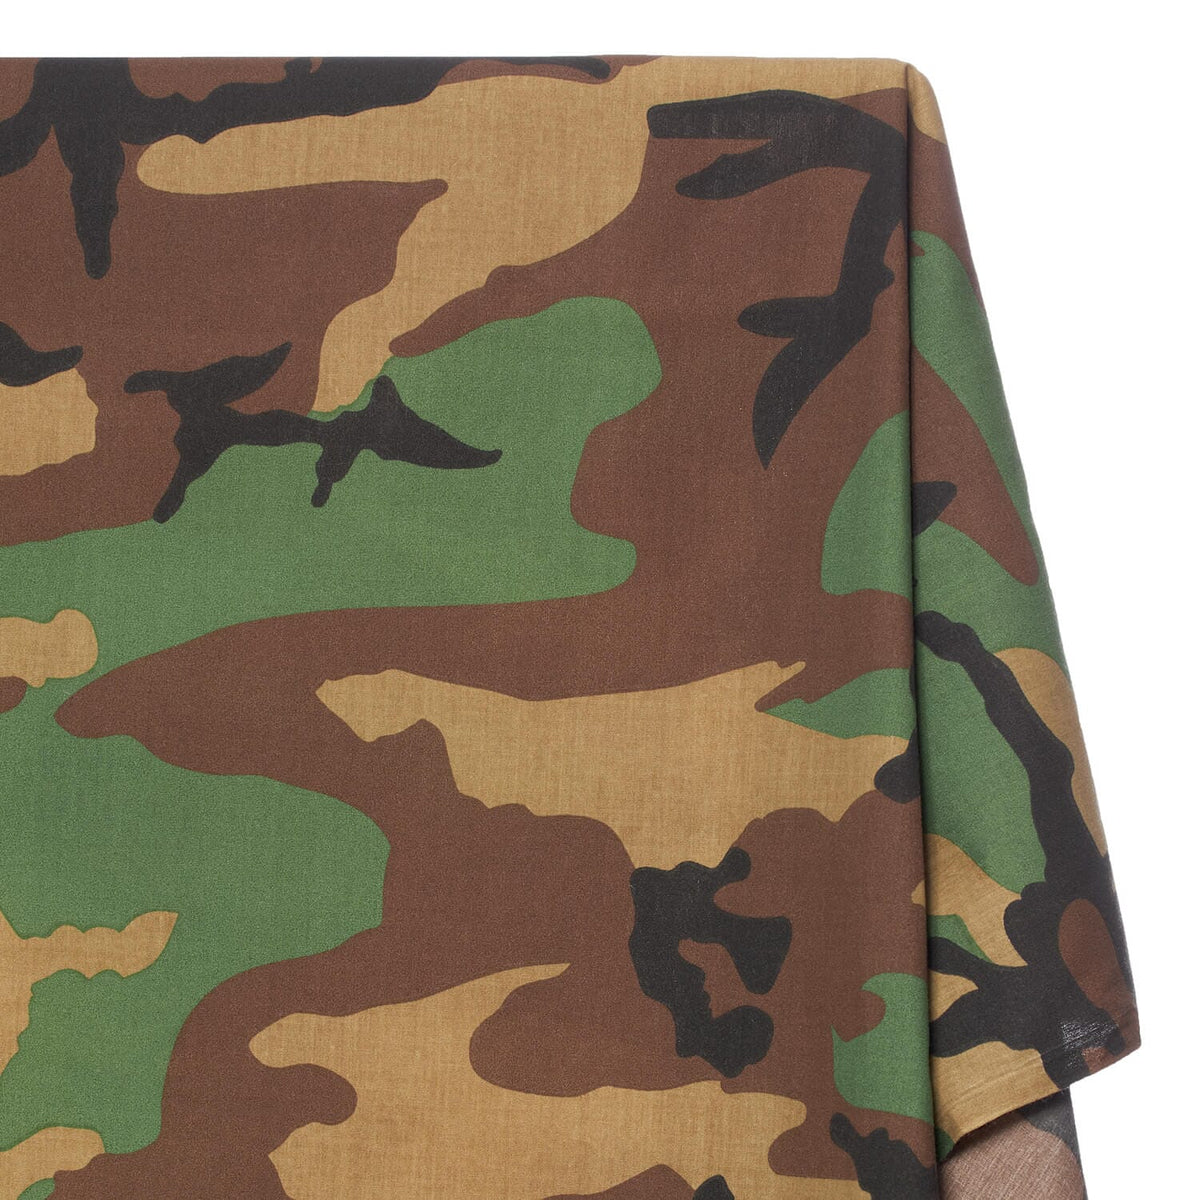 GetUSCart- Camouflage Print Fabric Cotton Polyester Broadcloth